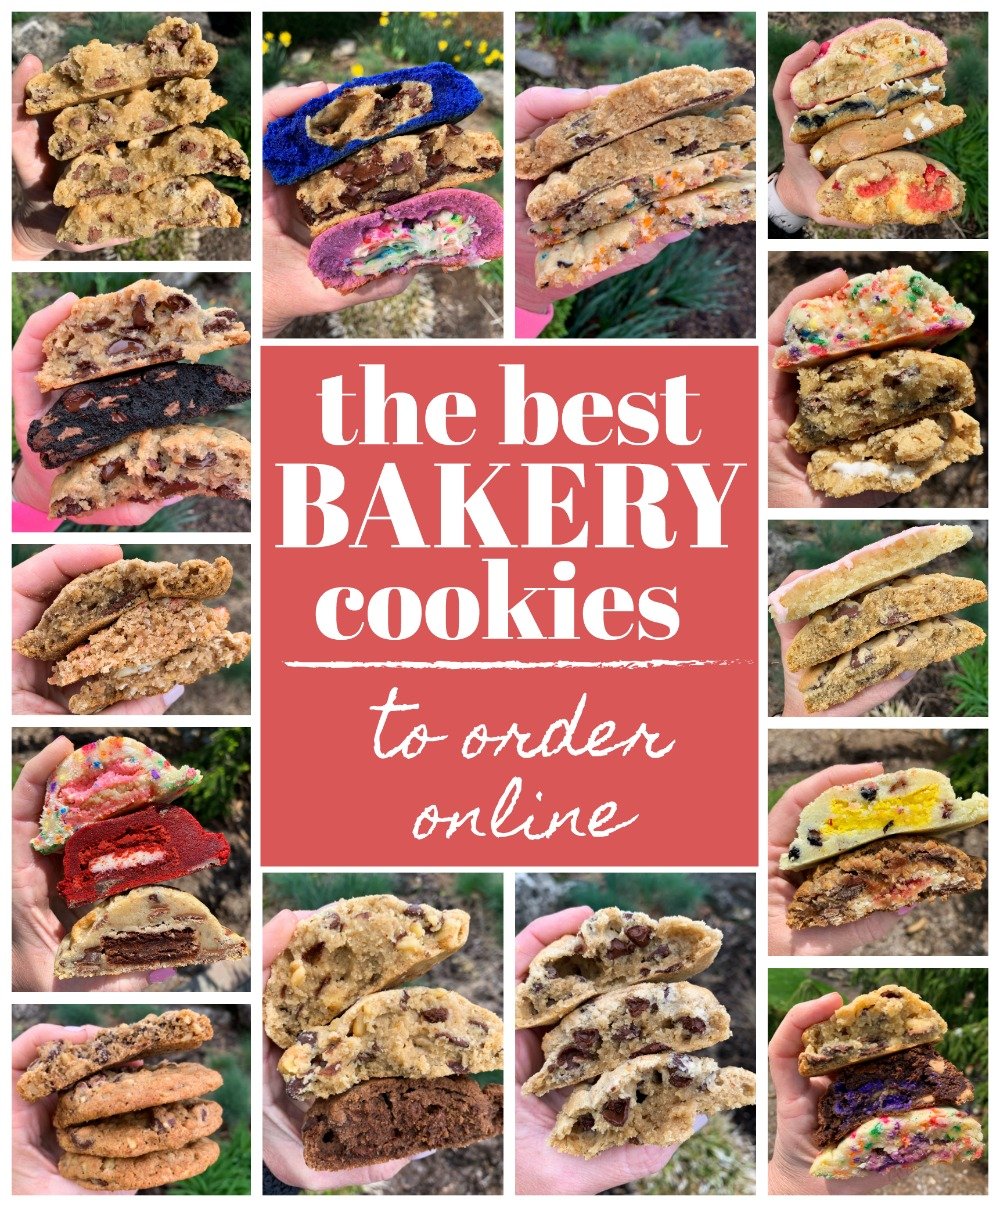 The Best Bakery Cookies To Order Online